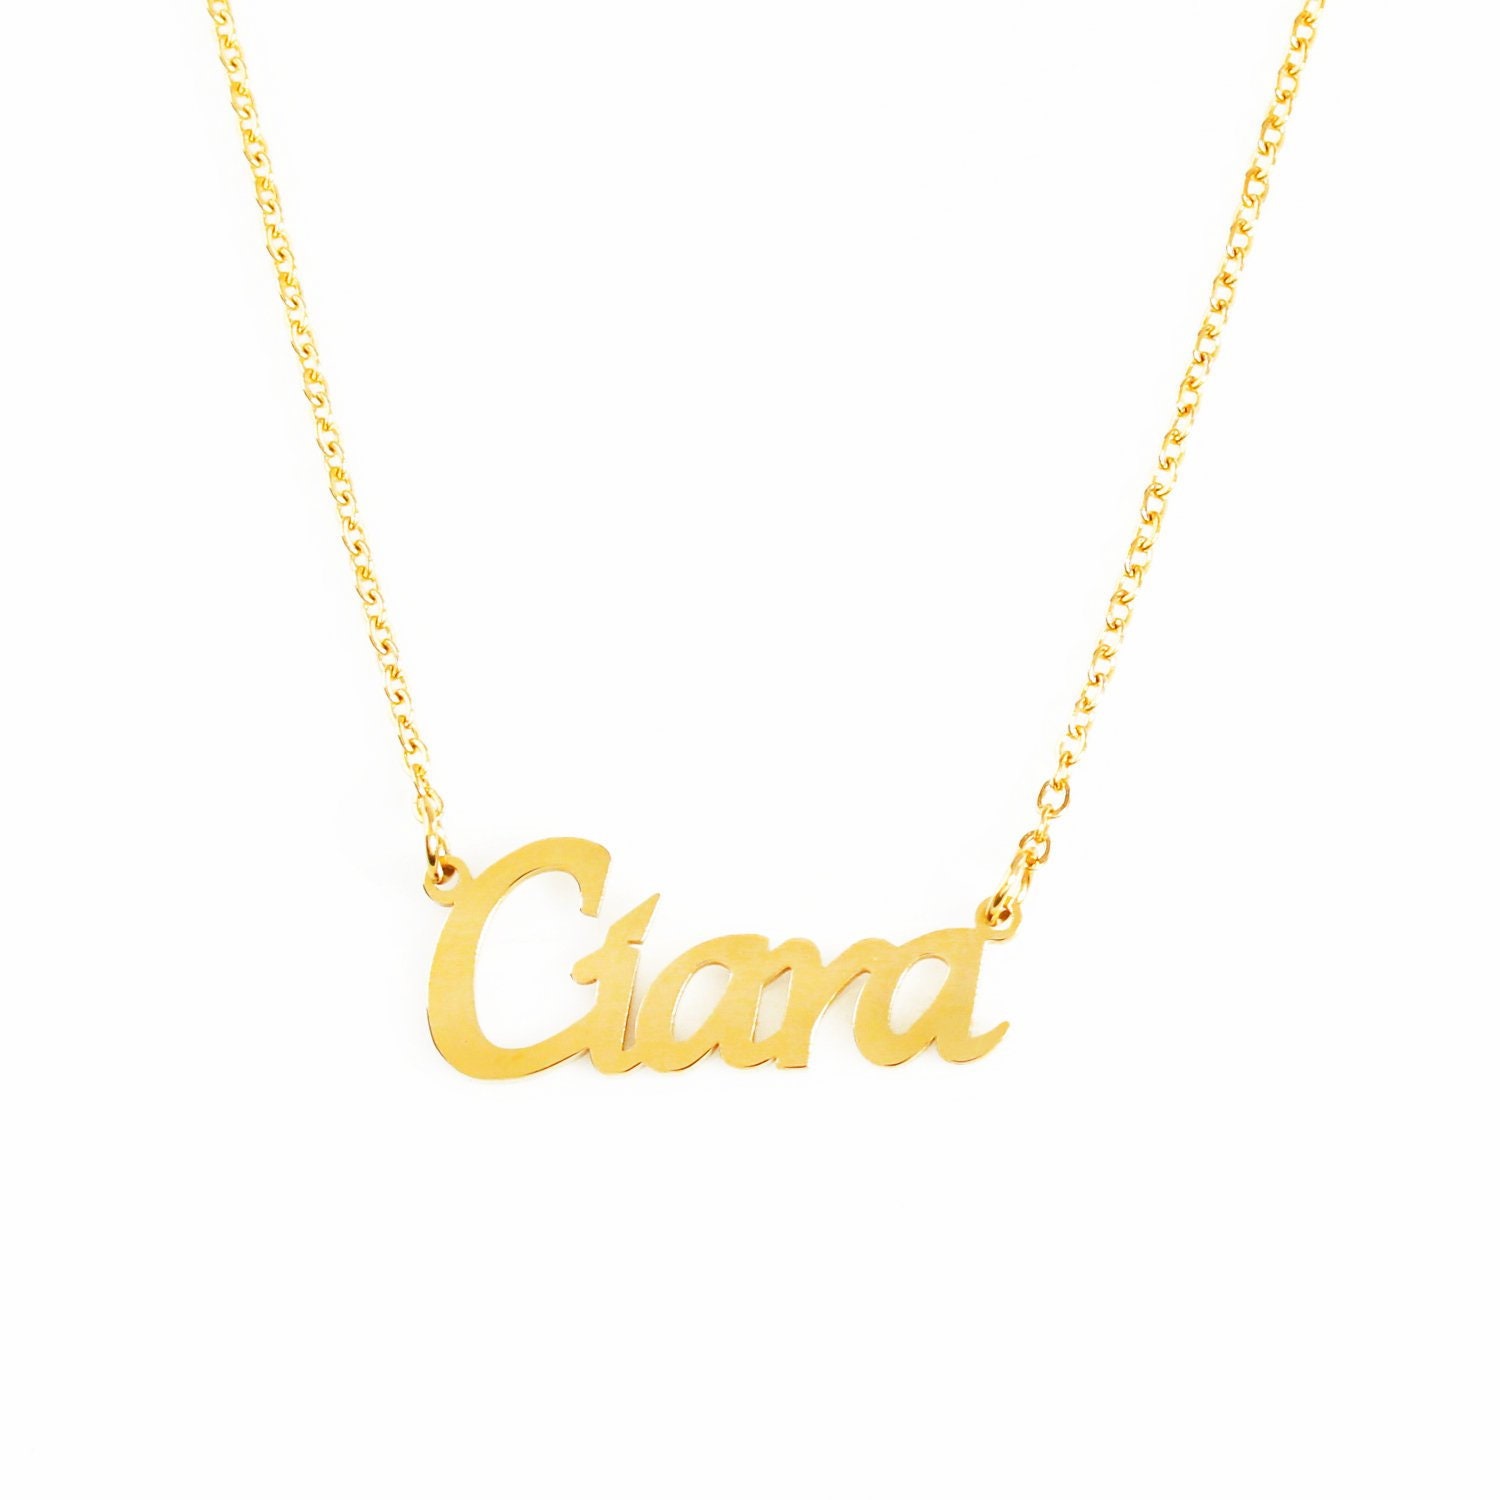 CIARA Personalized Name Necklace 18ct Rose Gold/gold/silver - Etsy